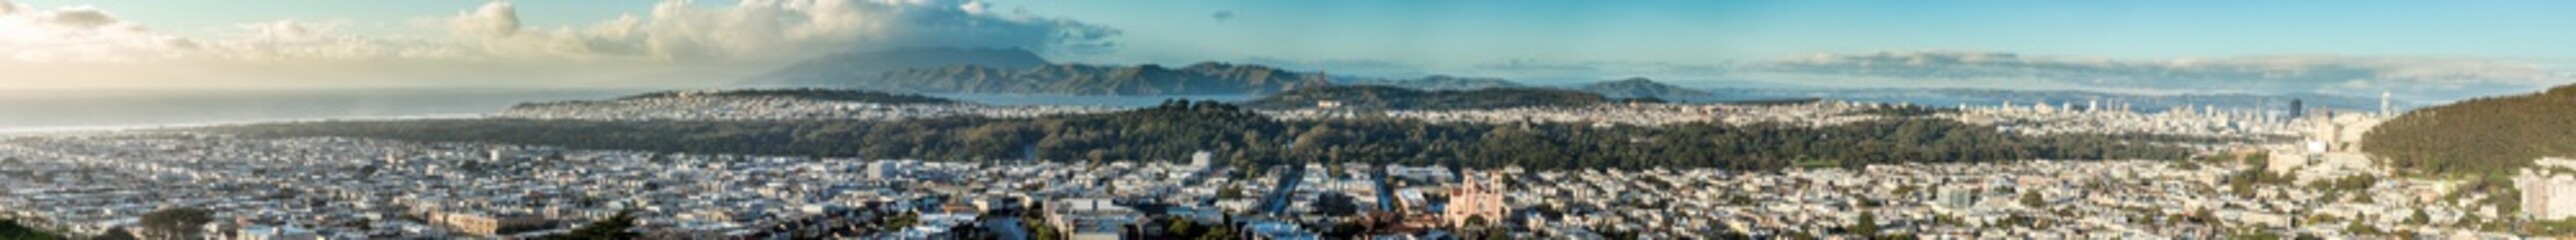 180 degree panorama of San Francisco from downtown to the Pacific Ocean.